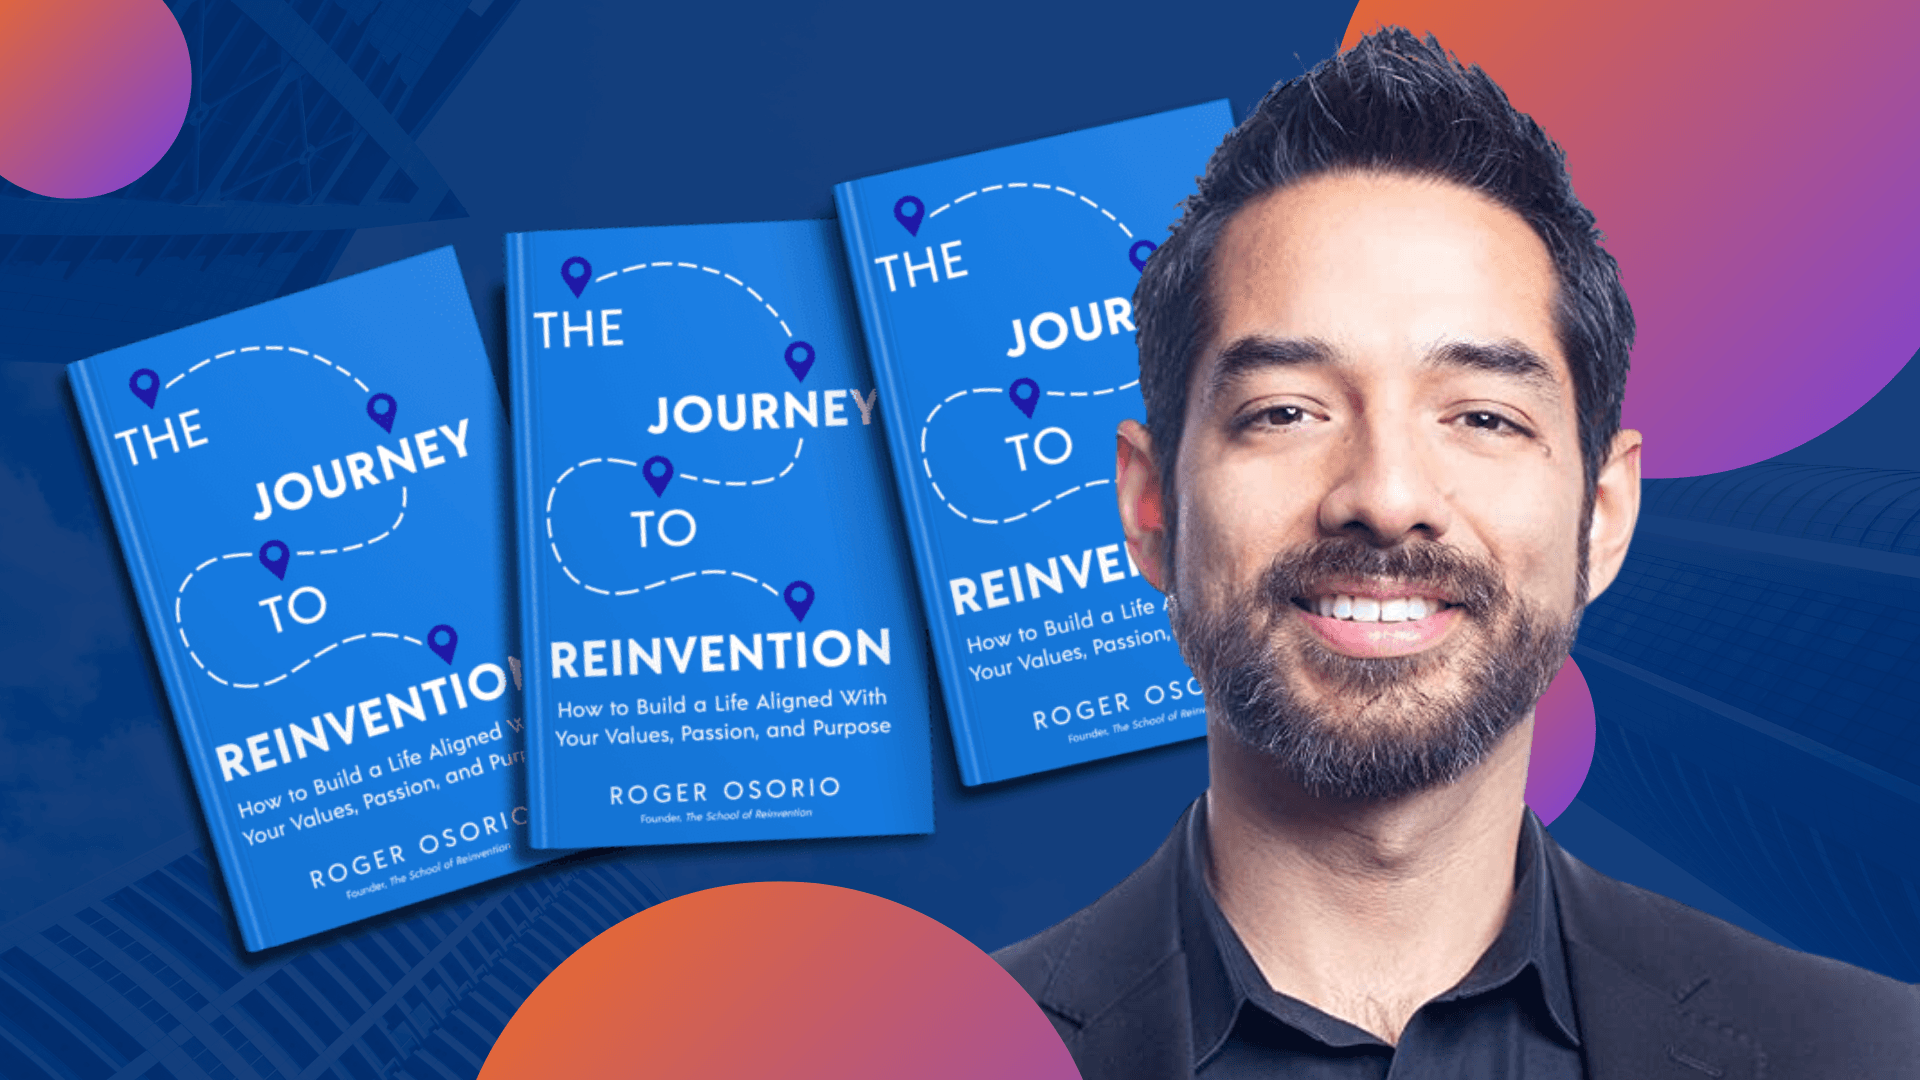 Dinis Guarda With Roger Osorio On The Journey To Reinvention 1.png